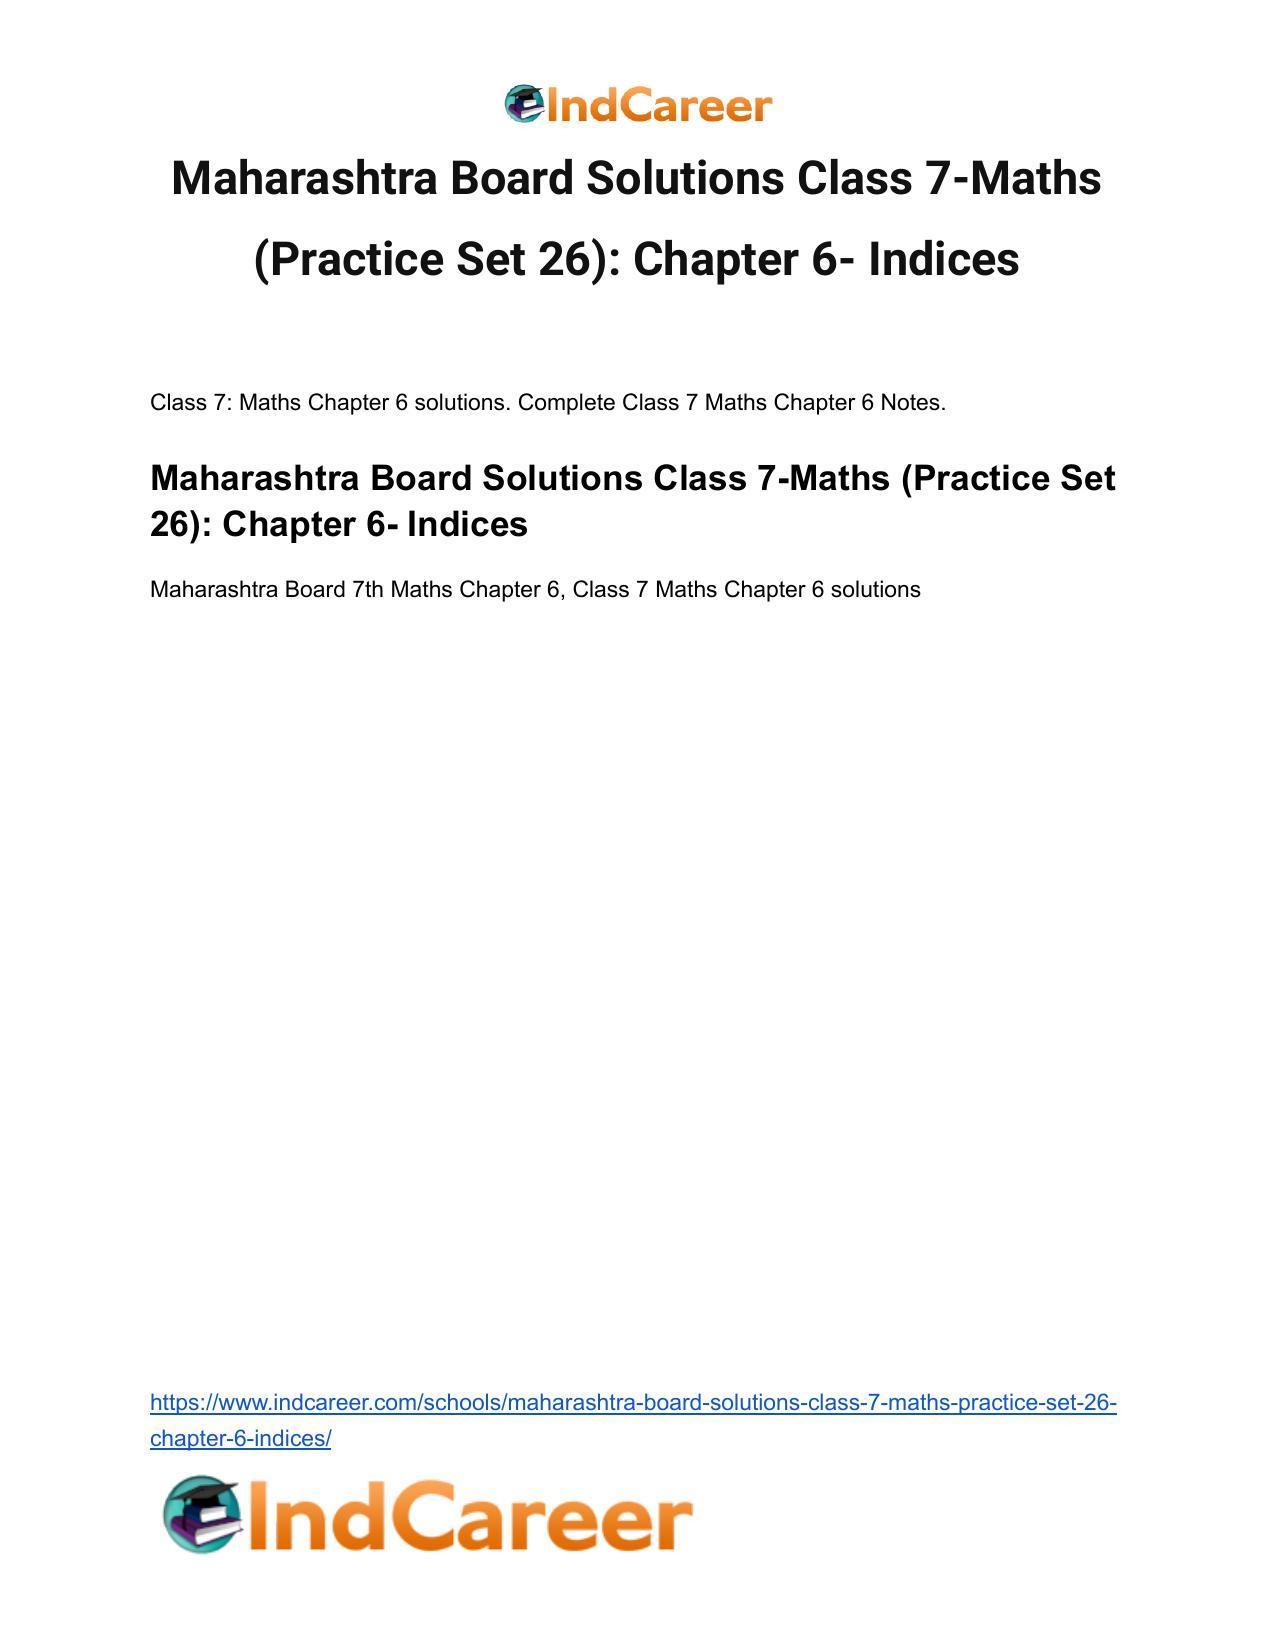 Maharashtra Board Solutions Class 7-Maths (Practice Set 26): Chapter 6- Indices - Page 2